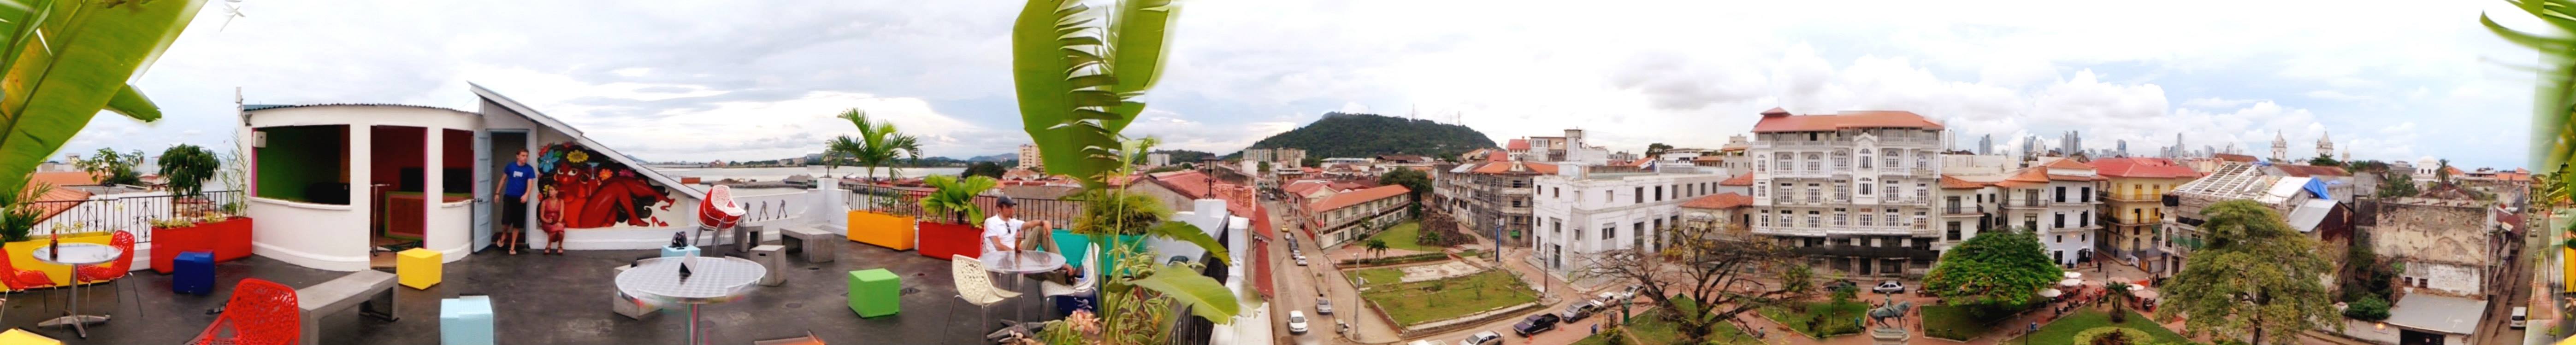 A "Panama Panorama" from the roof of Panamericana Hostel in Panama City